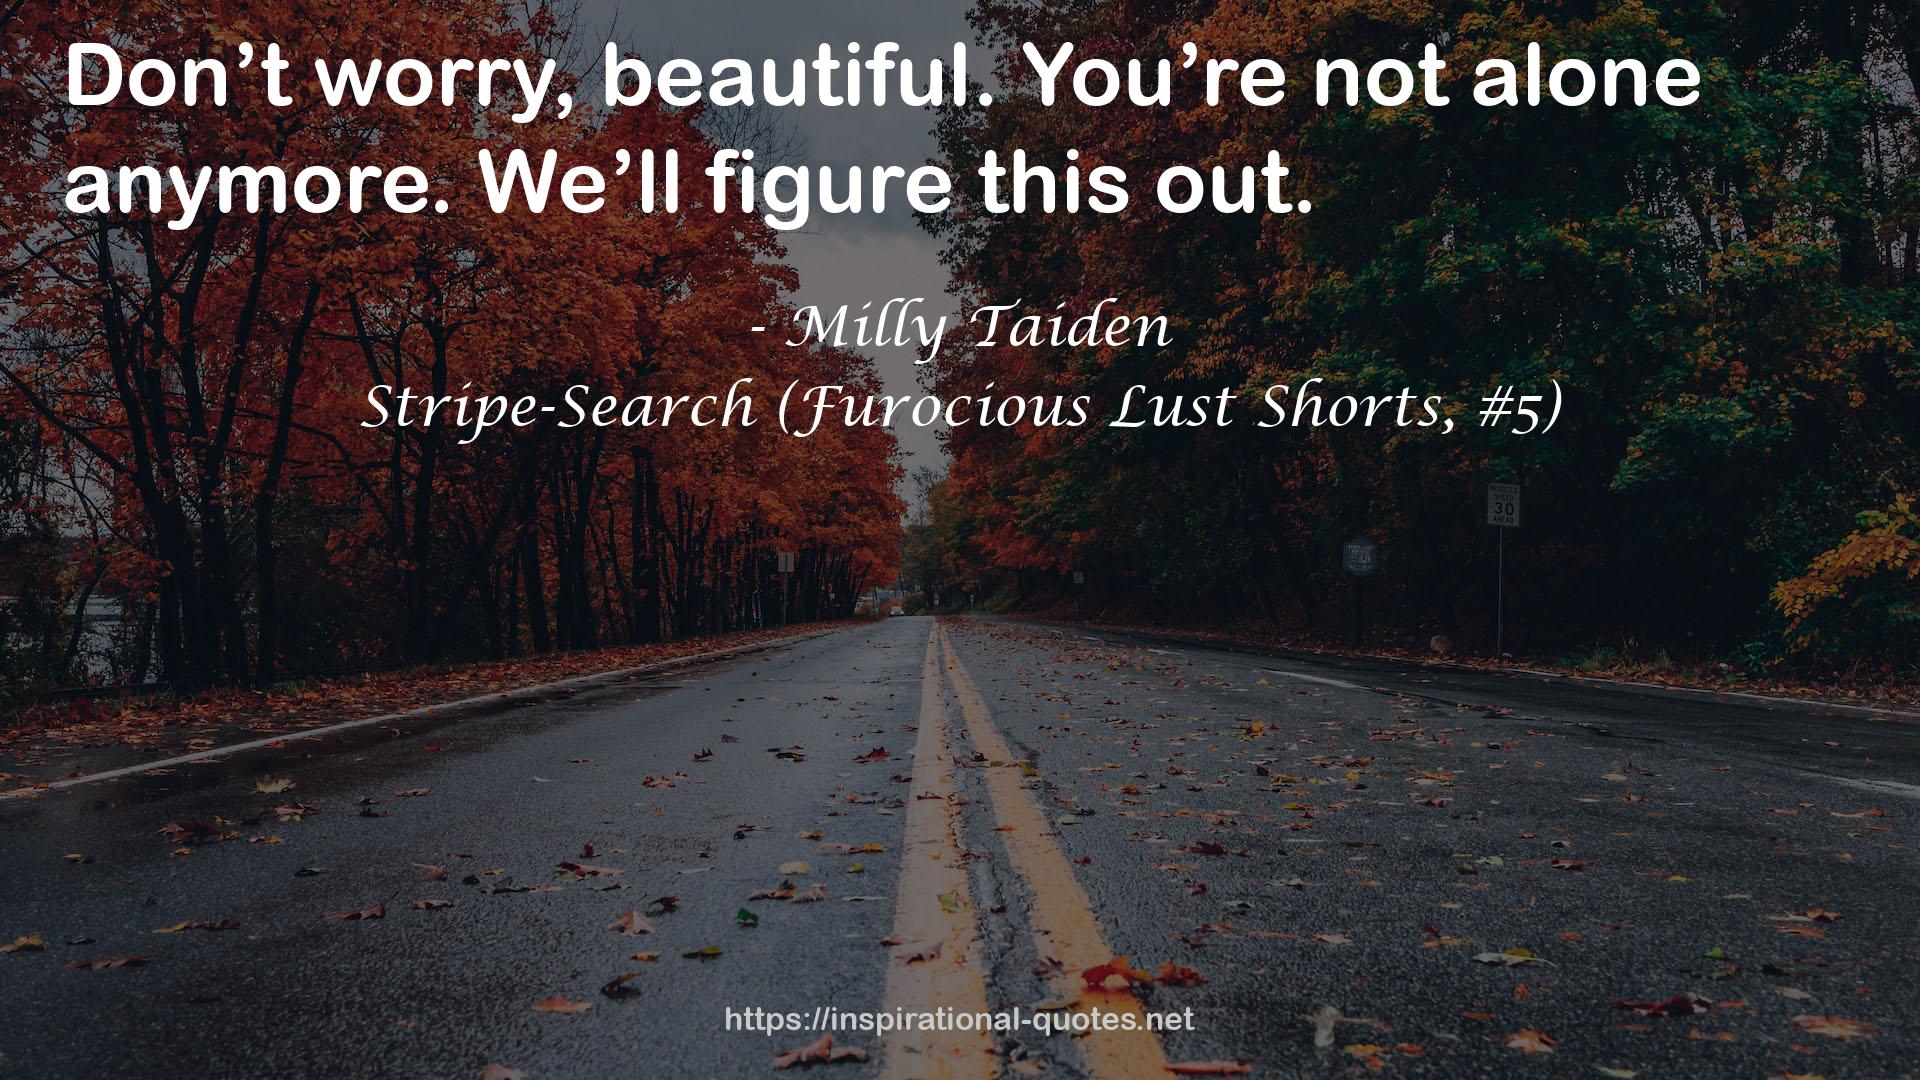 Stripe-Search (Furocious Lust Shorts, #5) QUOTES